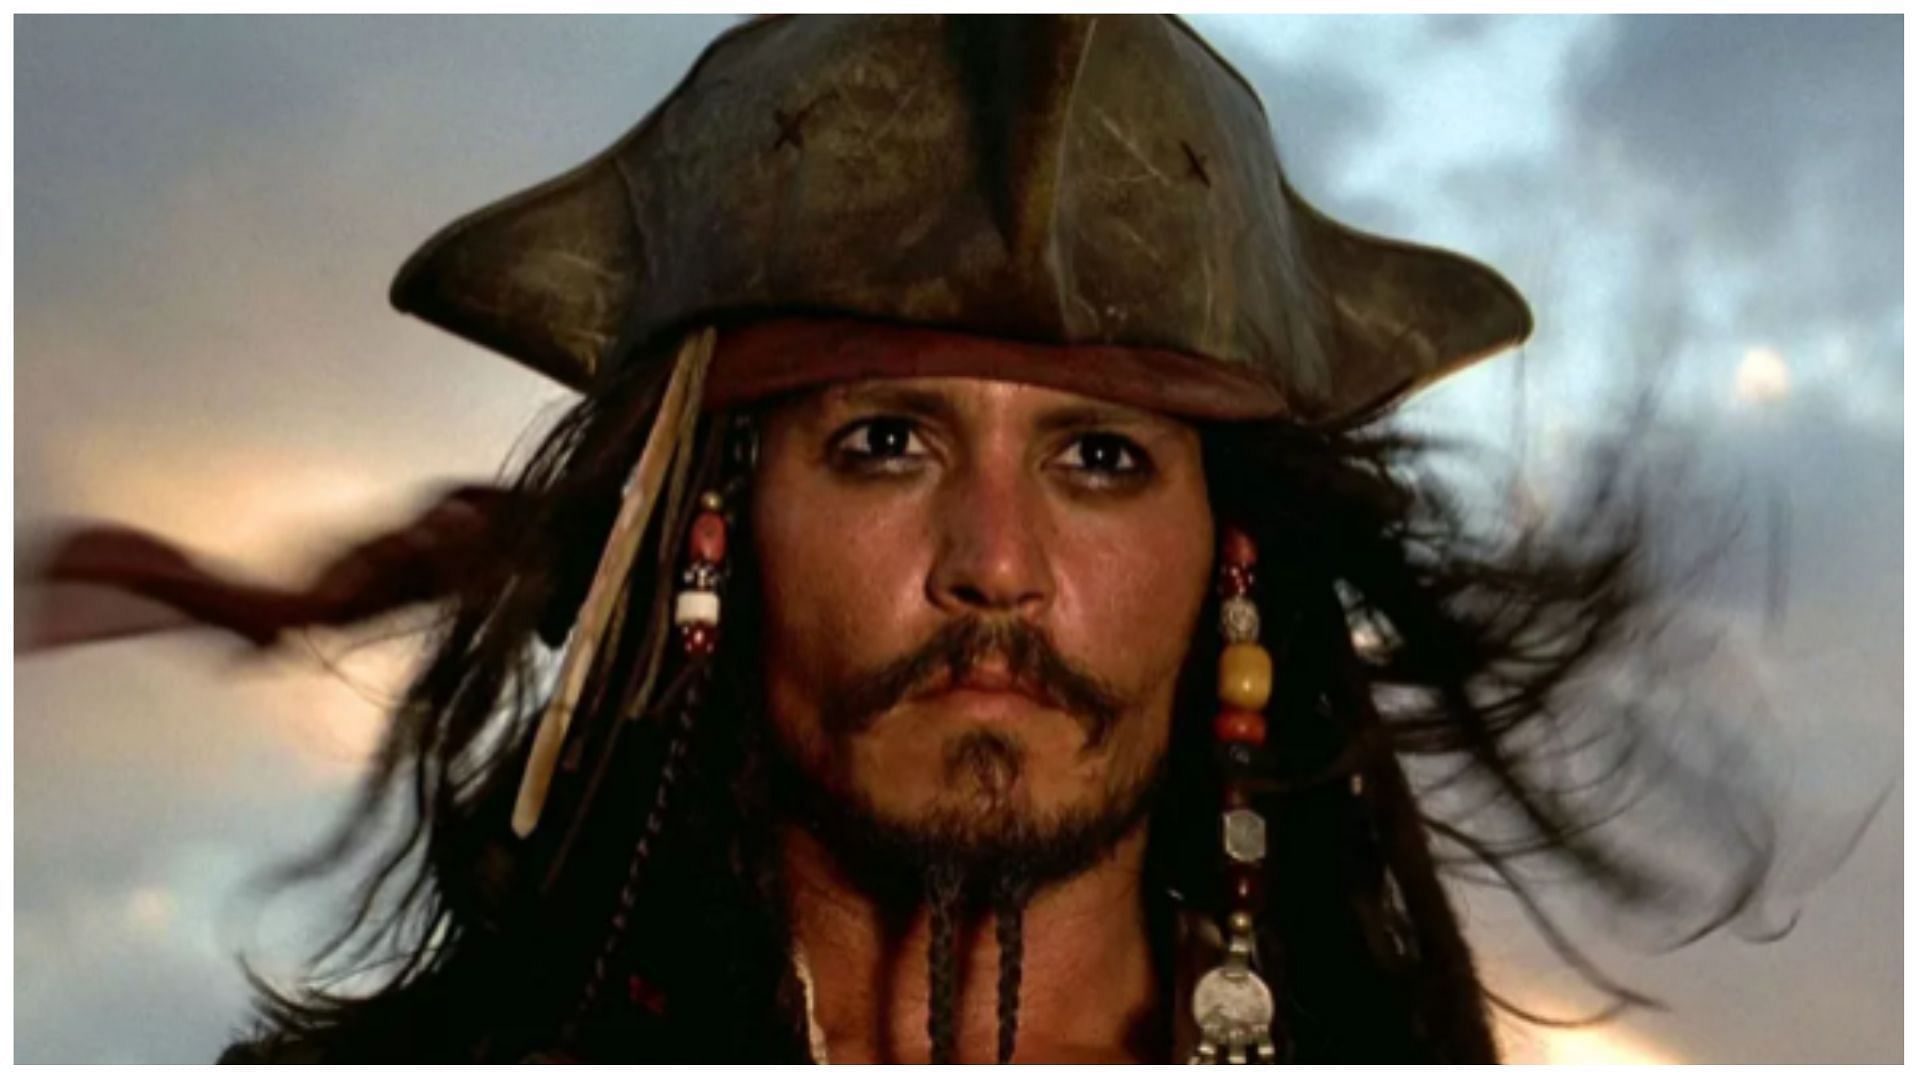 Reports suggest that Disney wants Depp to rejoin the Pirates of The Carribean franchise (image via Disney/Pirates of the Carribean)